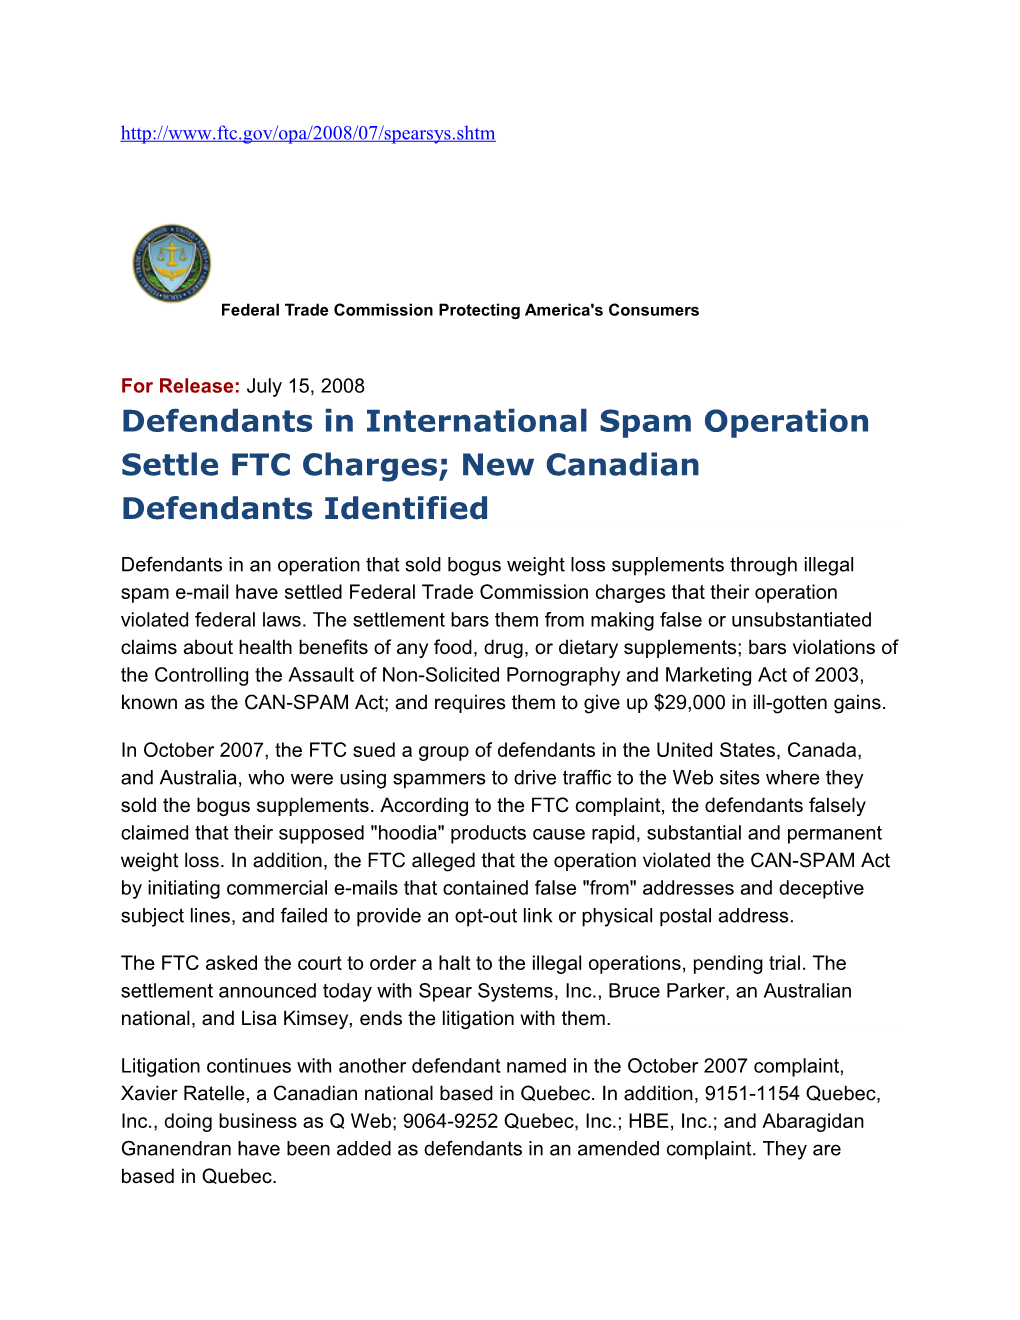 Defendants in International Spam Operation Settle FTC Charges; New Canadian Defendants